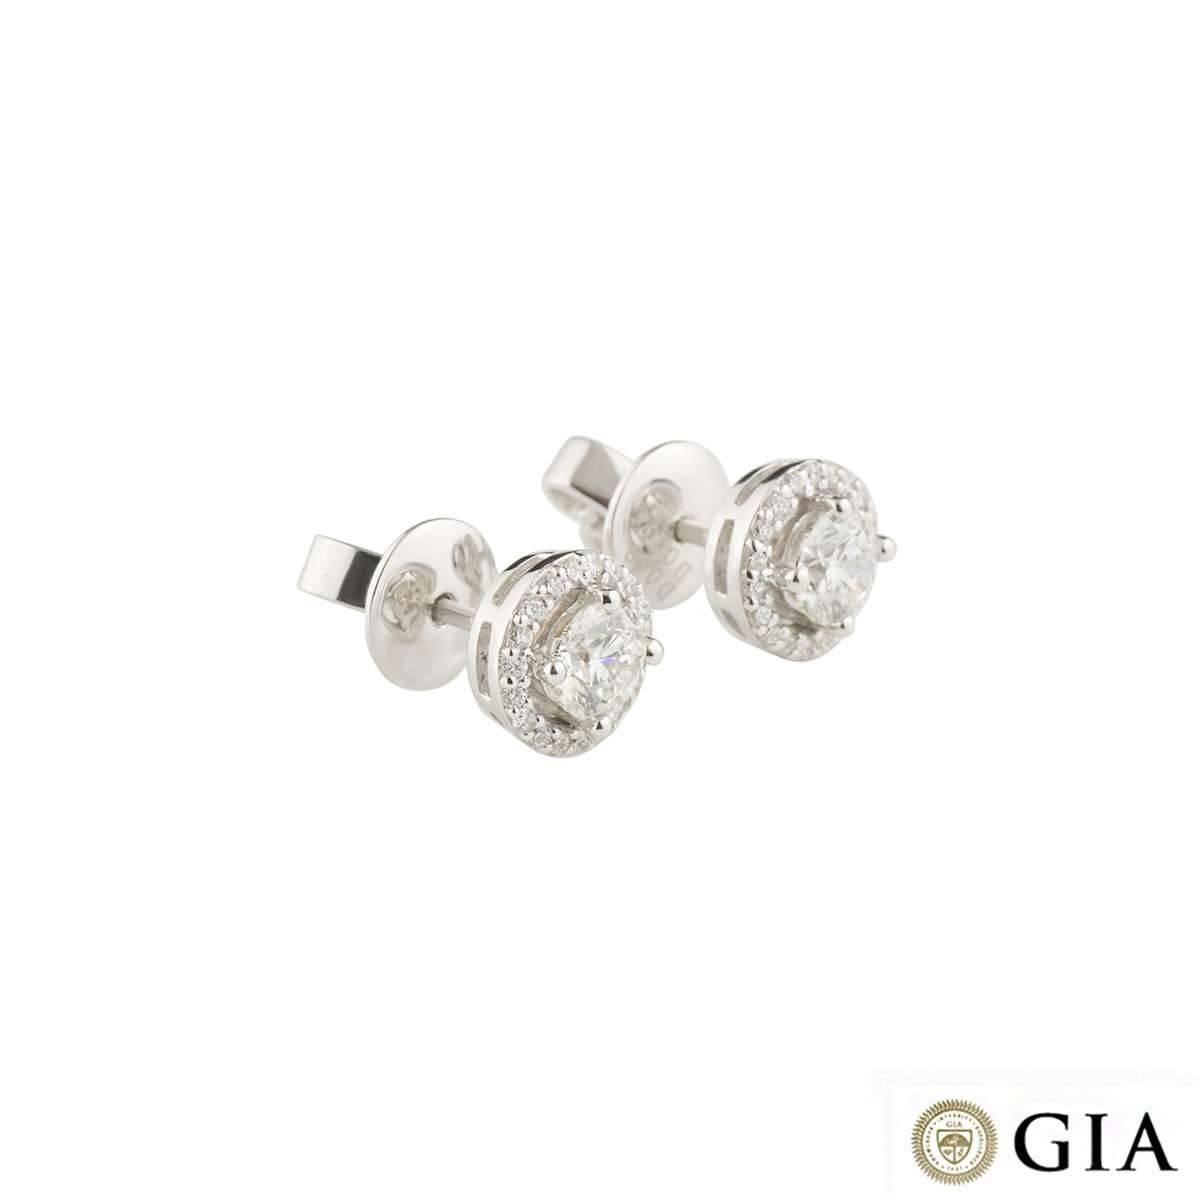 A beautiful pair of 18k white gold diamond earrings. The earrings are each set to the centre with a round brilliant cut diamond weighing approximately 0.40ct, G colour and VS1 clarity. Complimenting the central stone is a halo of 18 round brilliant